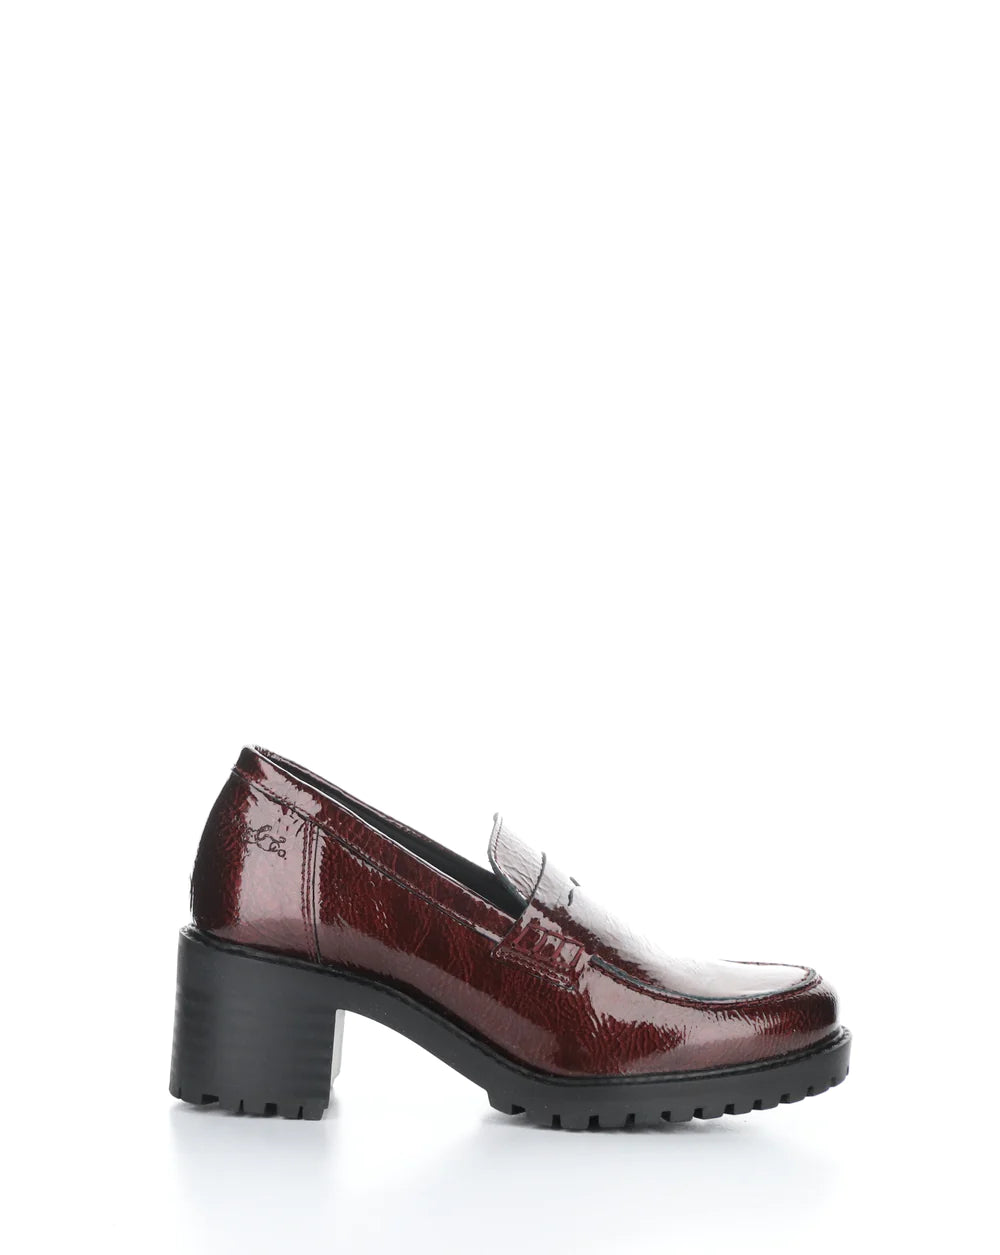 Bos and Co Inna Bordo Leather Patent Heeled Loafer